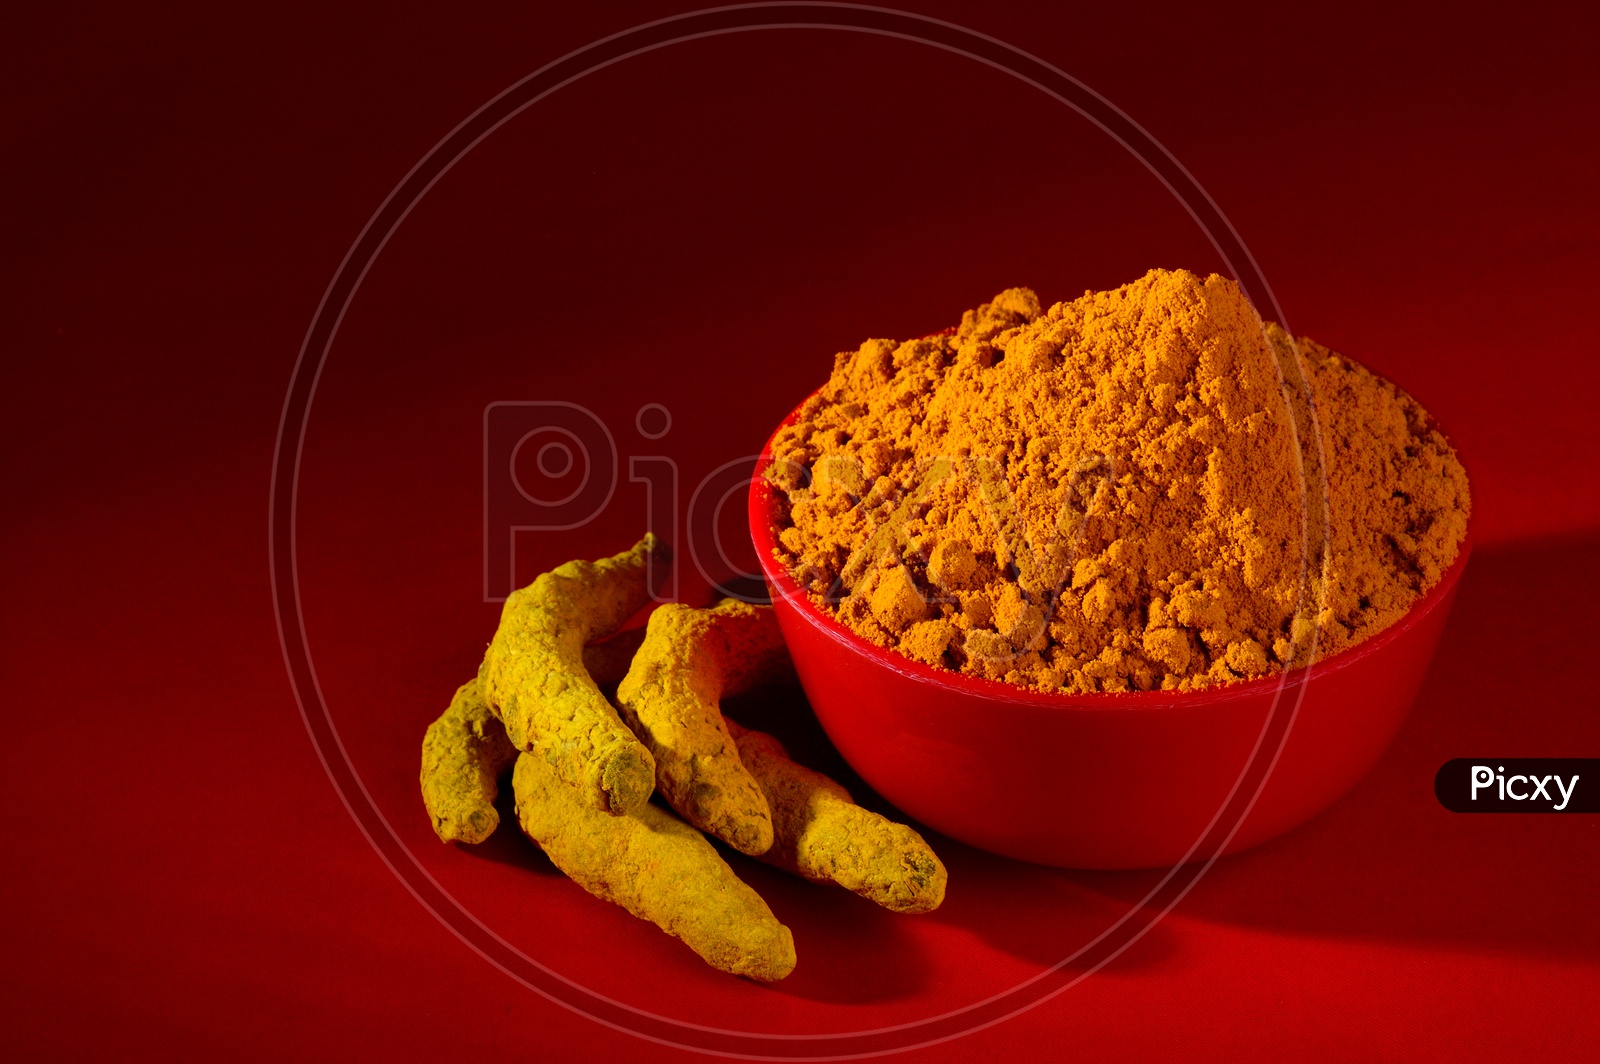 Dry Turmeric powder and roots or barks in red bowl on red background